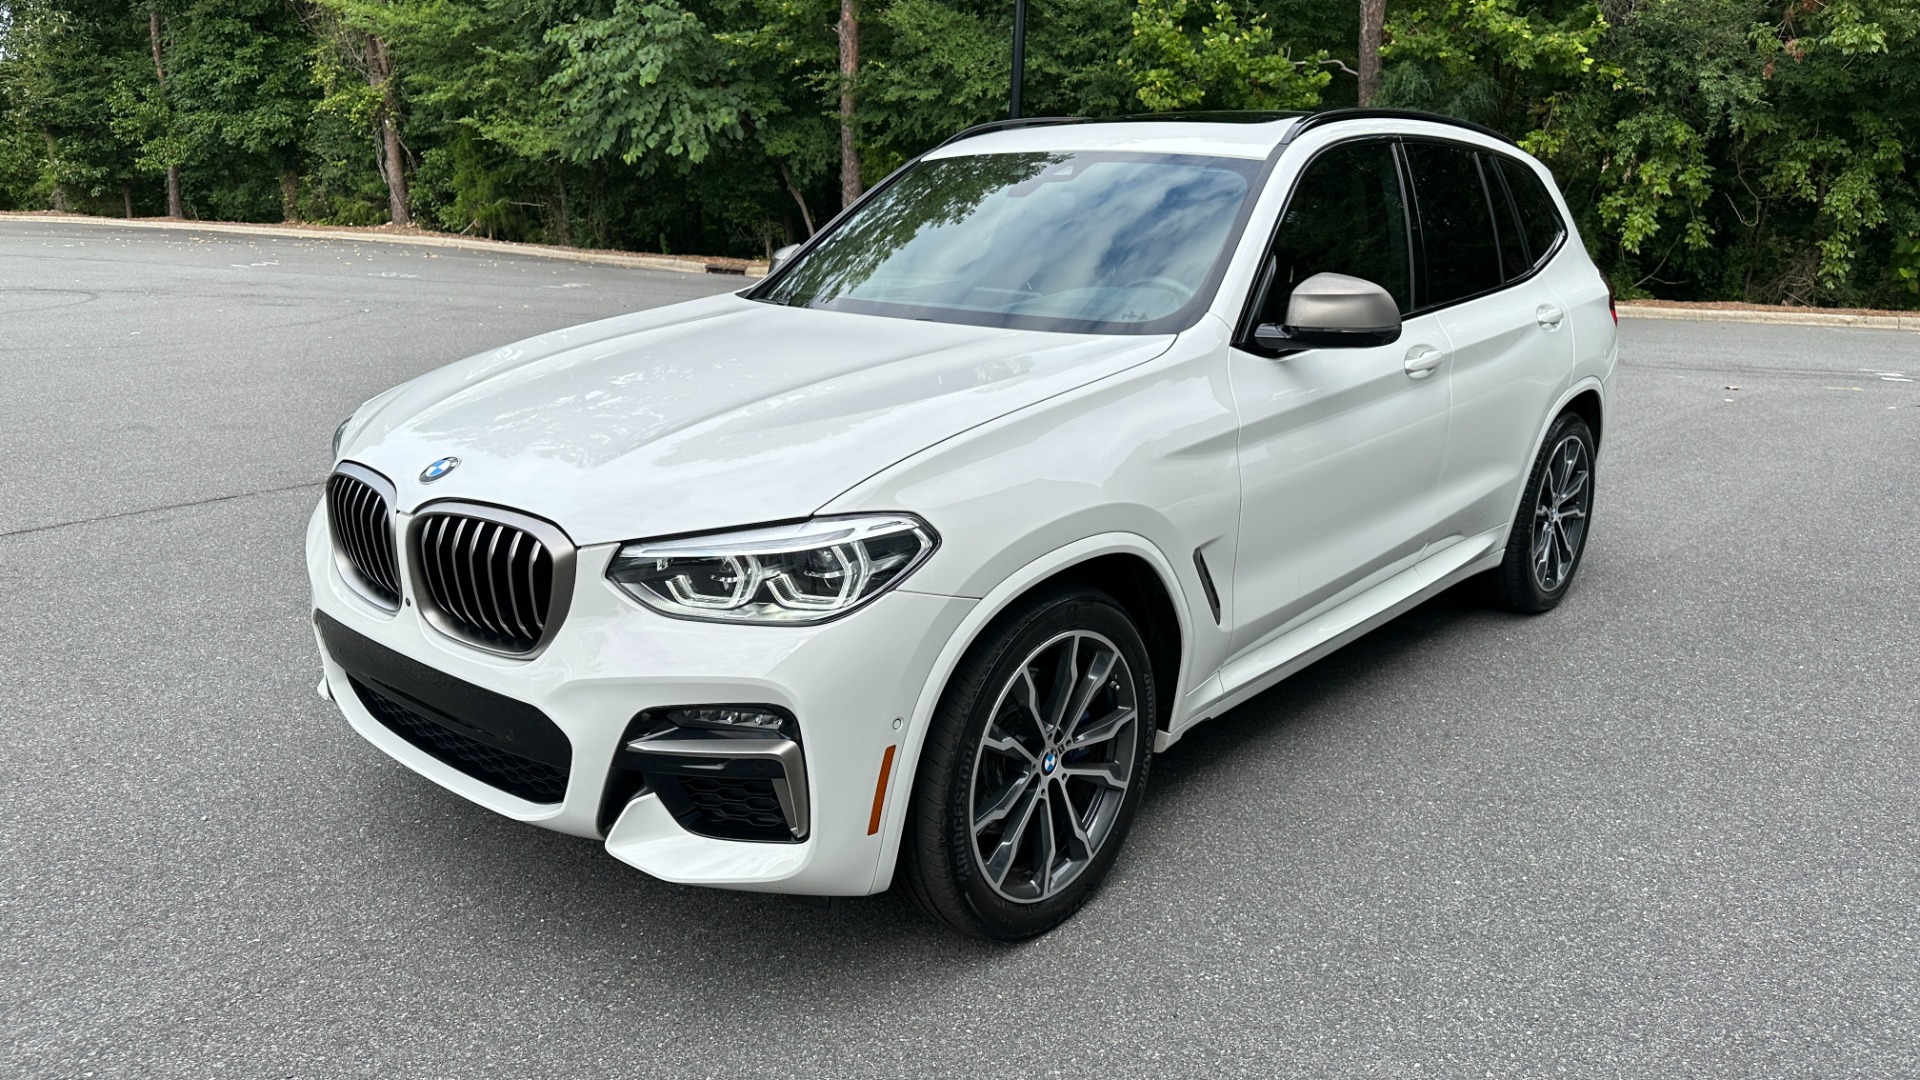 Used 2020 BMW X3 M40i / DRIVER ASSIST / EXECUTIVE PACKAGE / HK SOUND / AMBIENT LIGHT for sale $40,995 at Formula Imports in Charlotte NC 28227 5